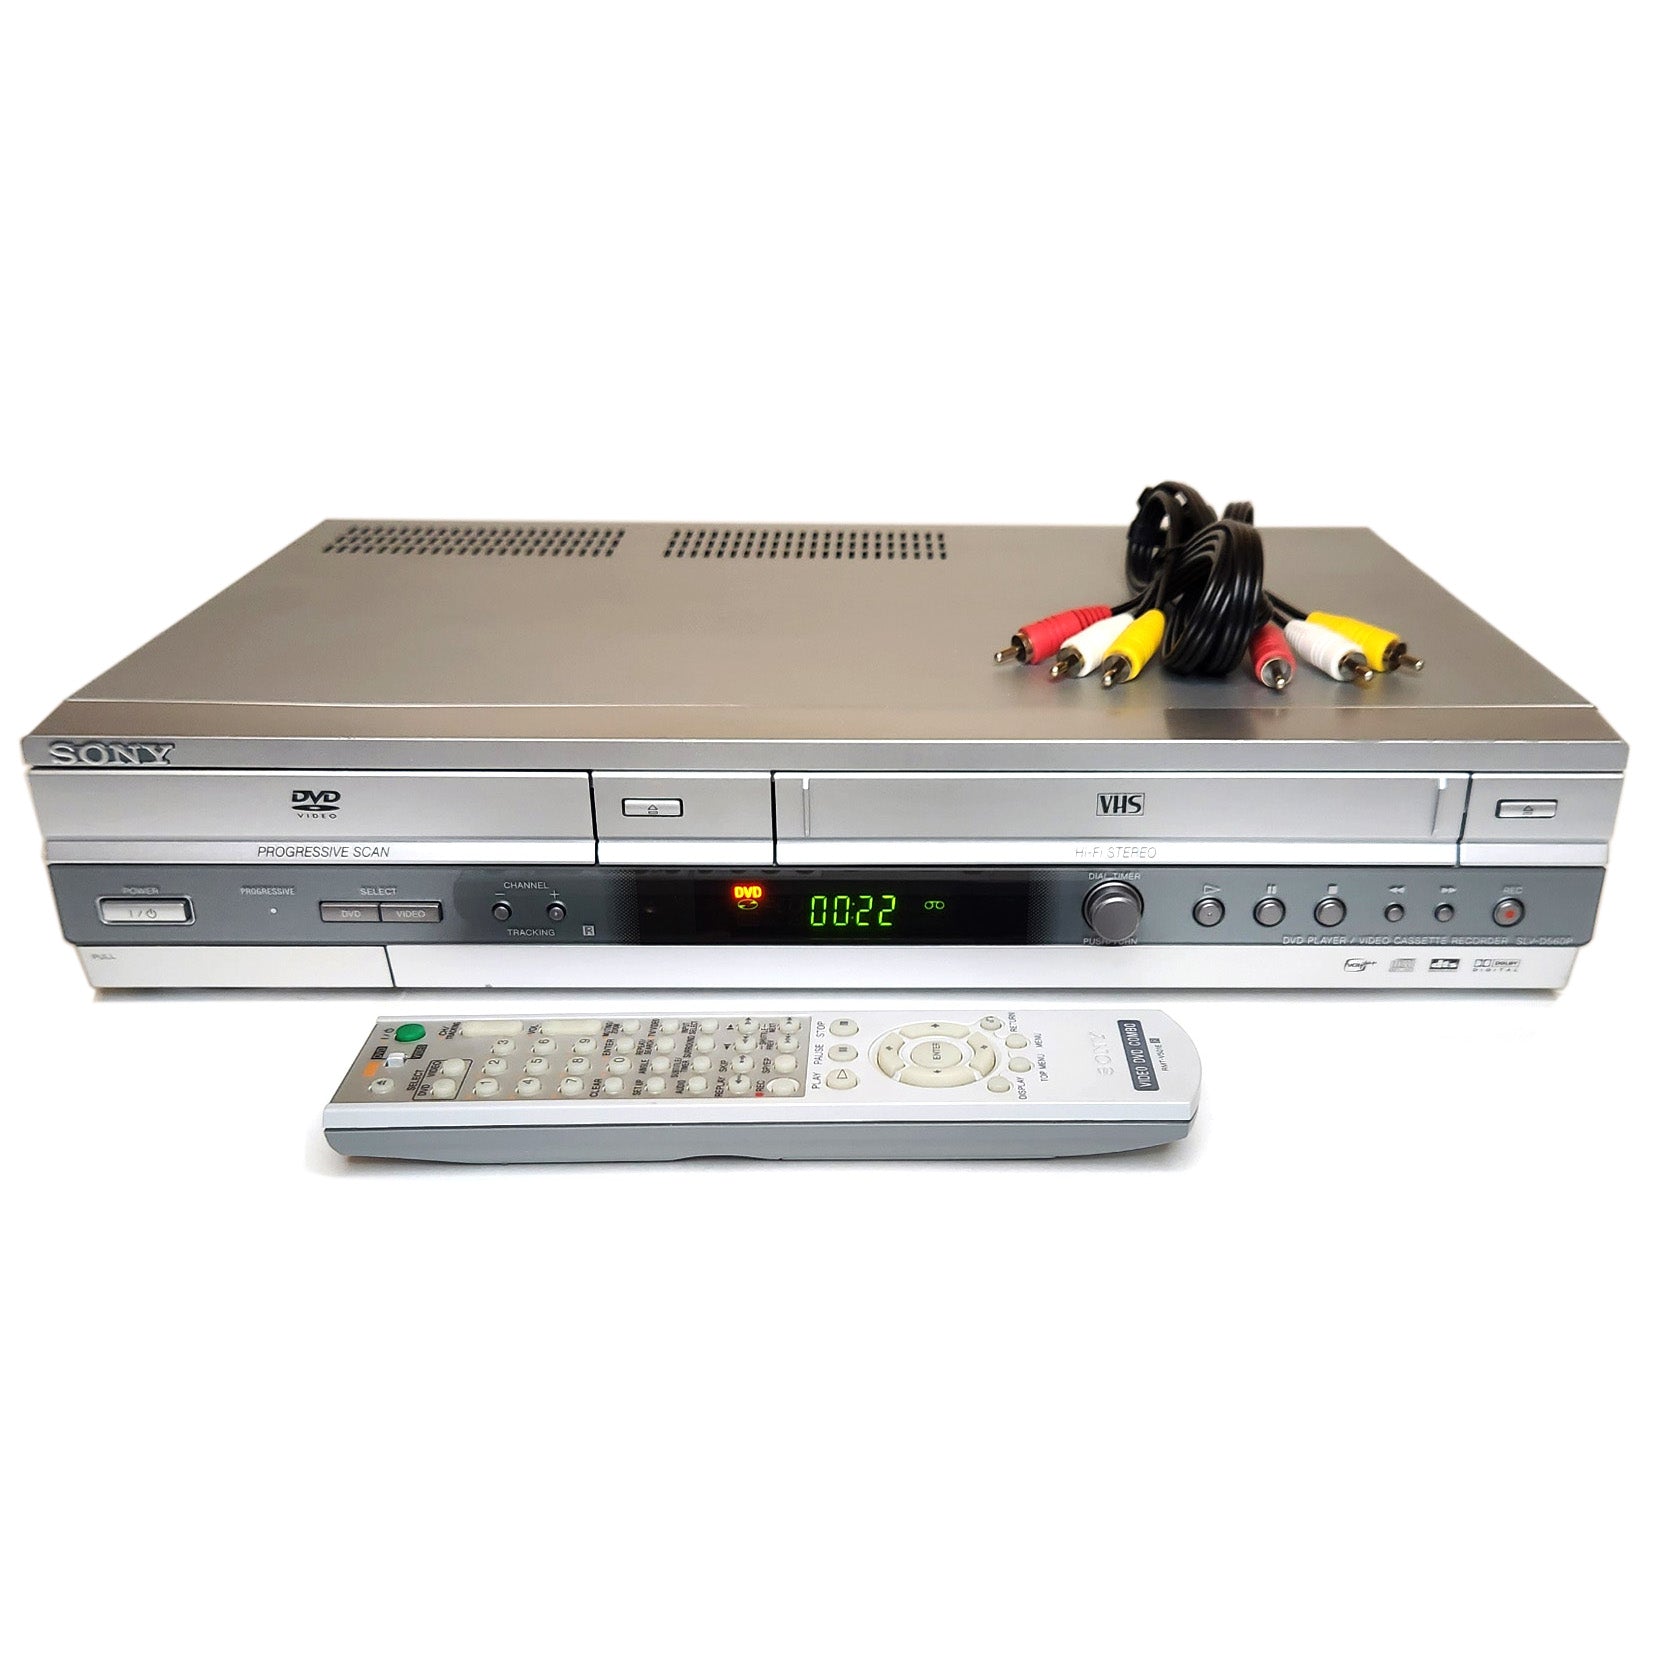 Sony SLV-D560P VCR/DVD Player Combo